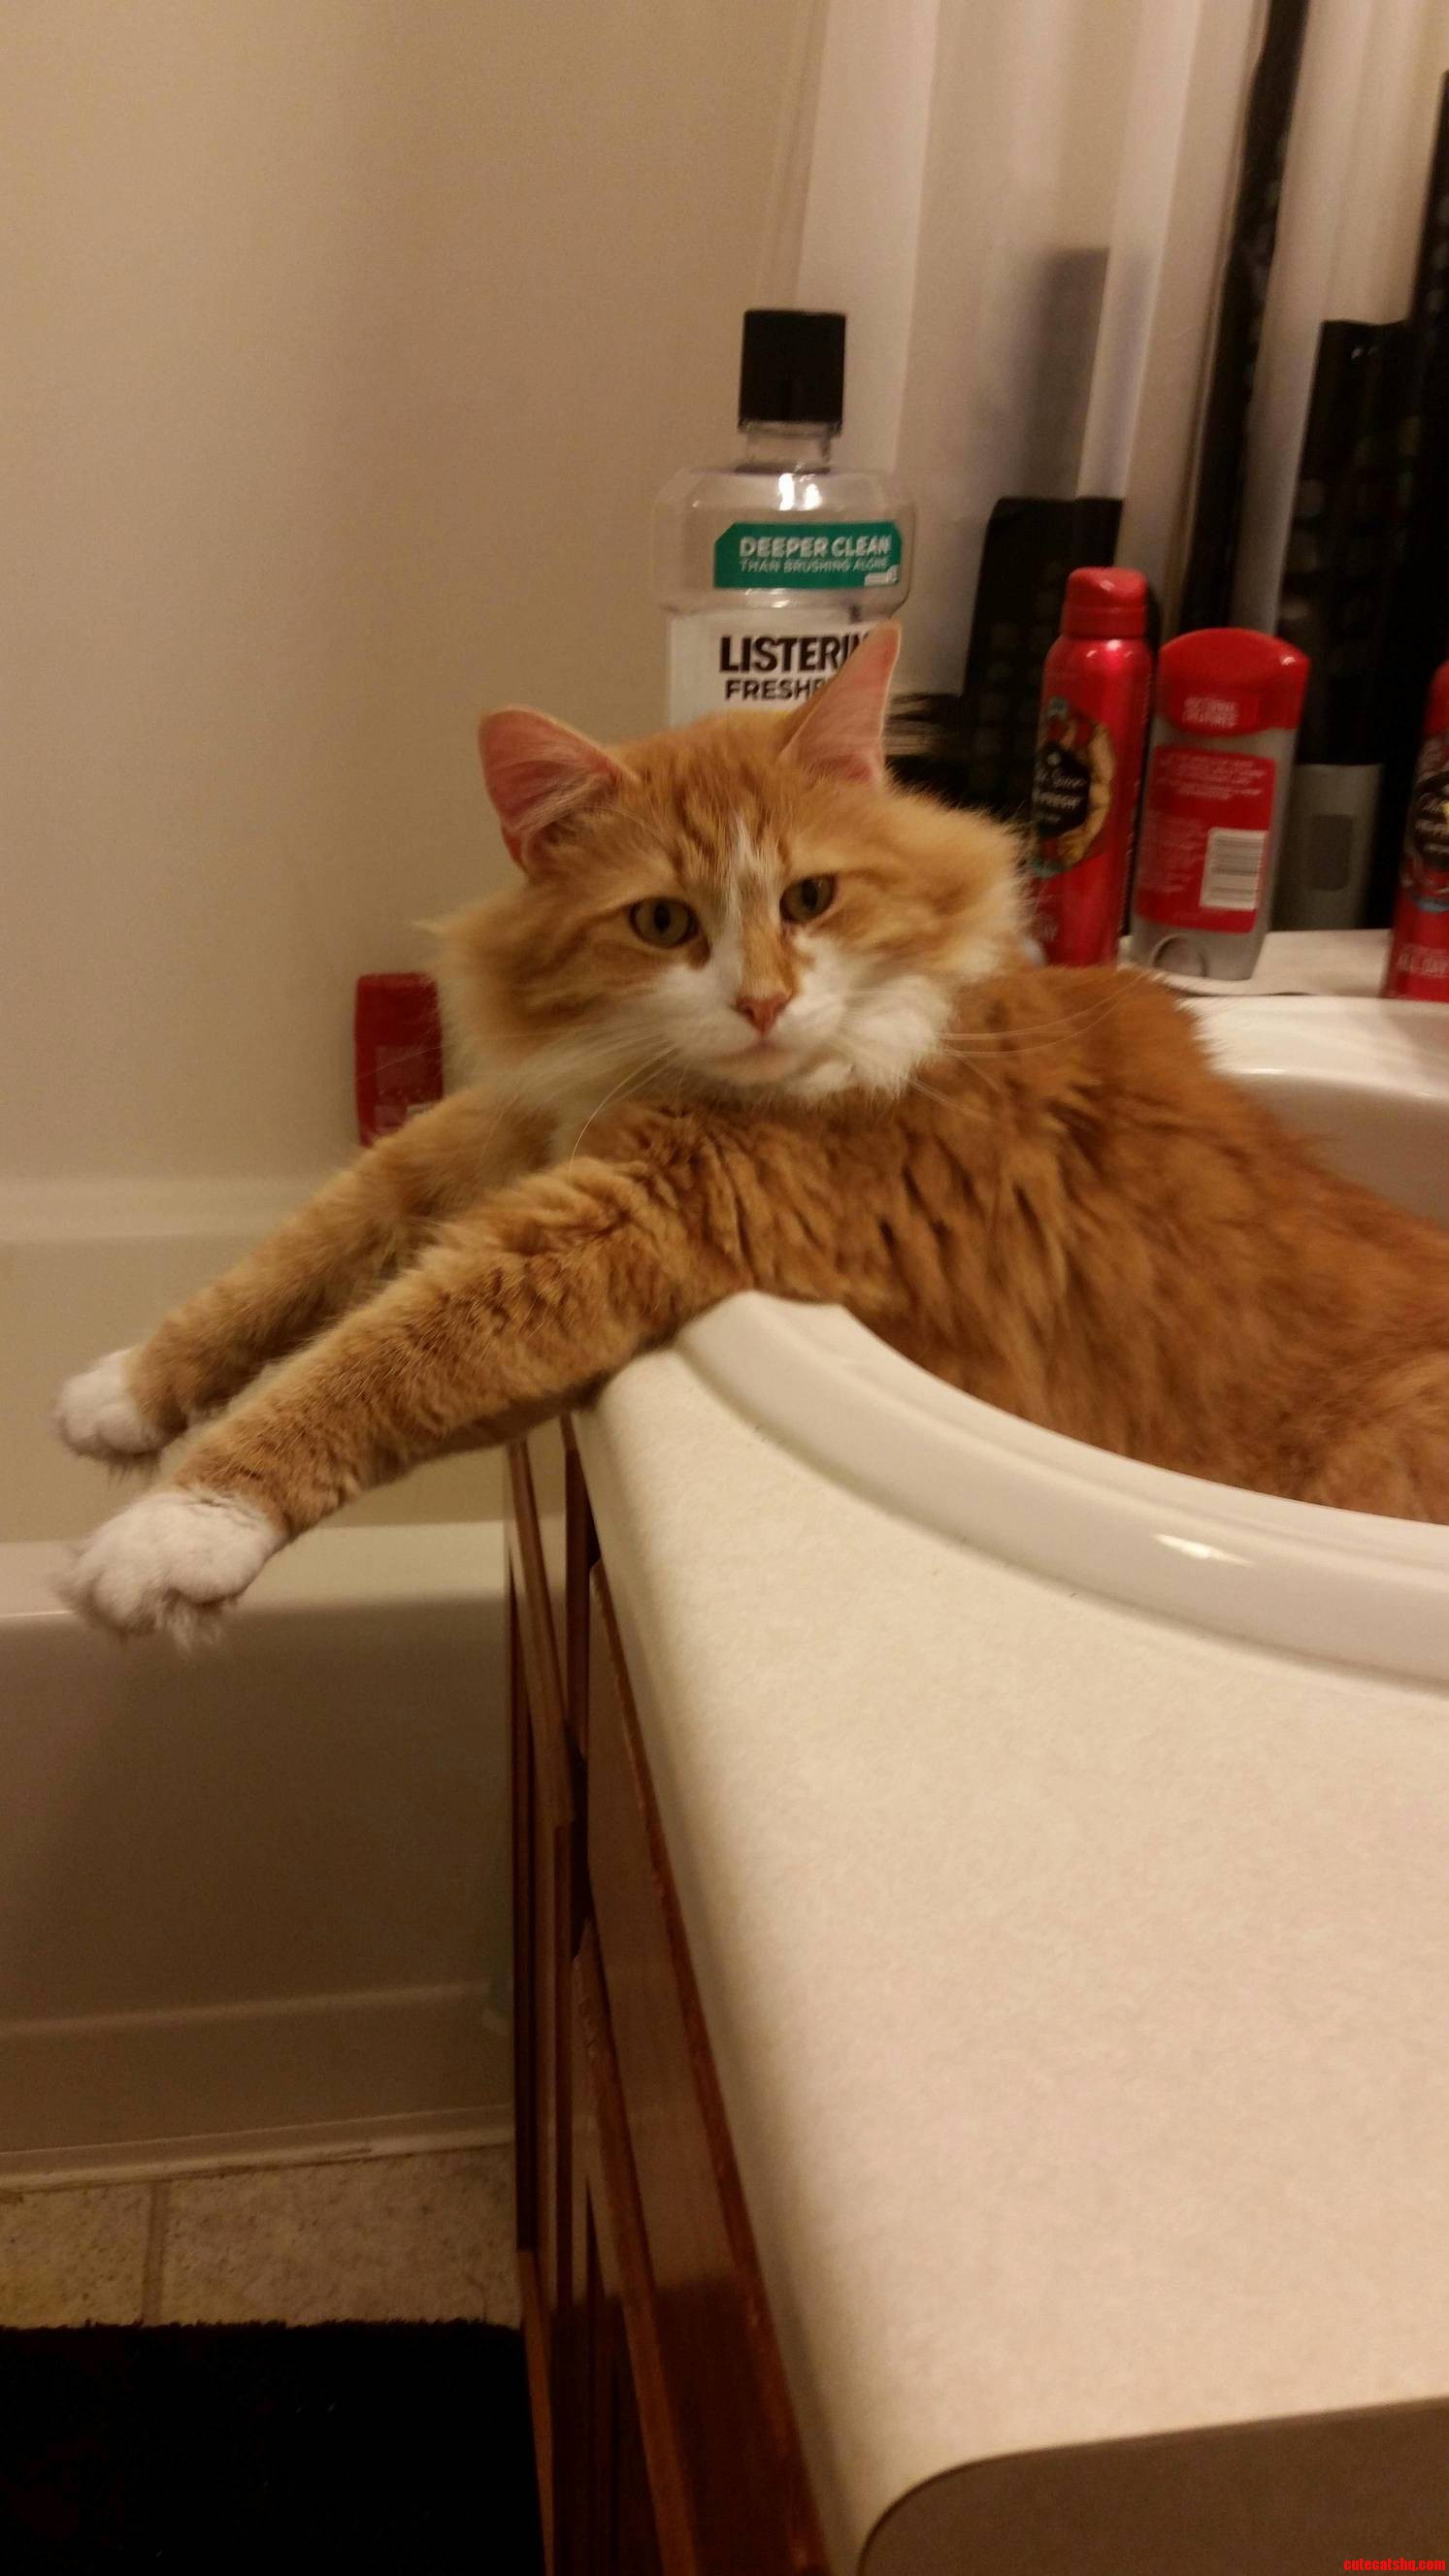 This is amadeus. he likes sinks.